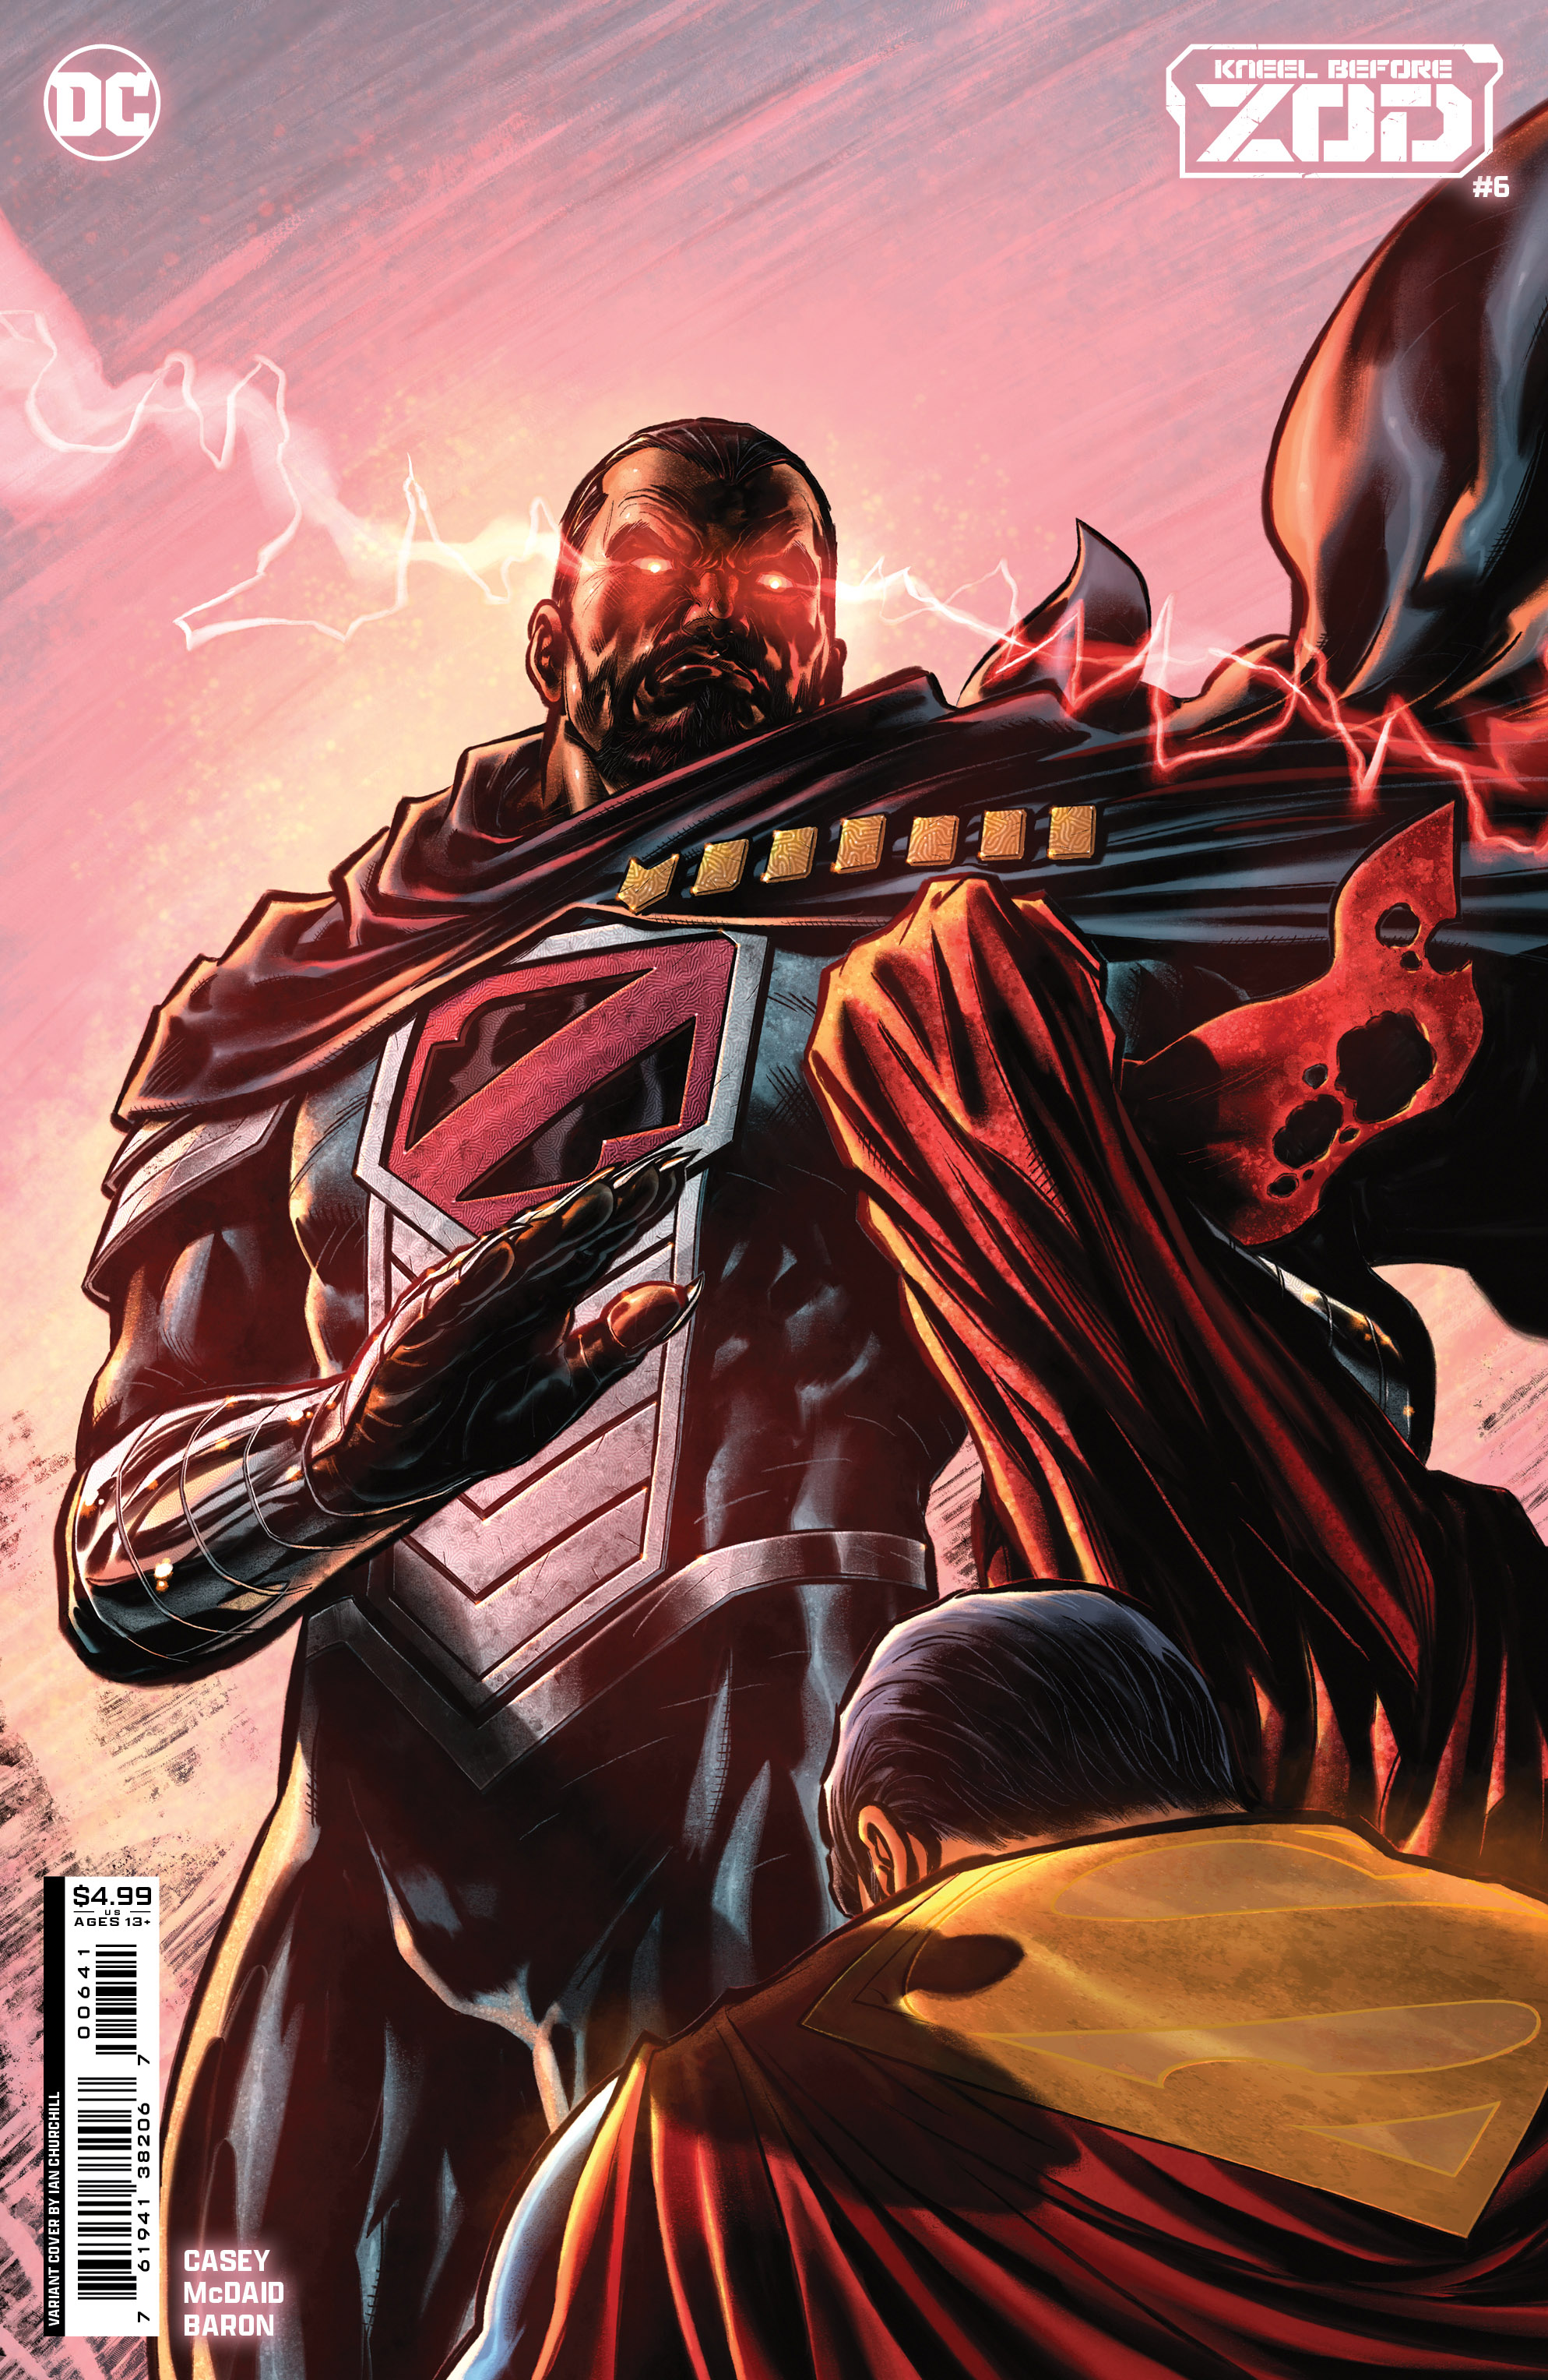 Kneel Before Zod #6 (Of 12) Cover C Ian Churchill Card Stock Variant